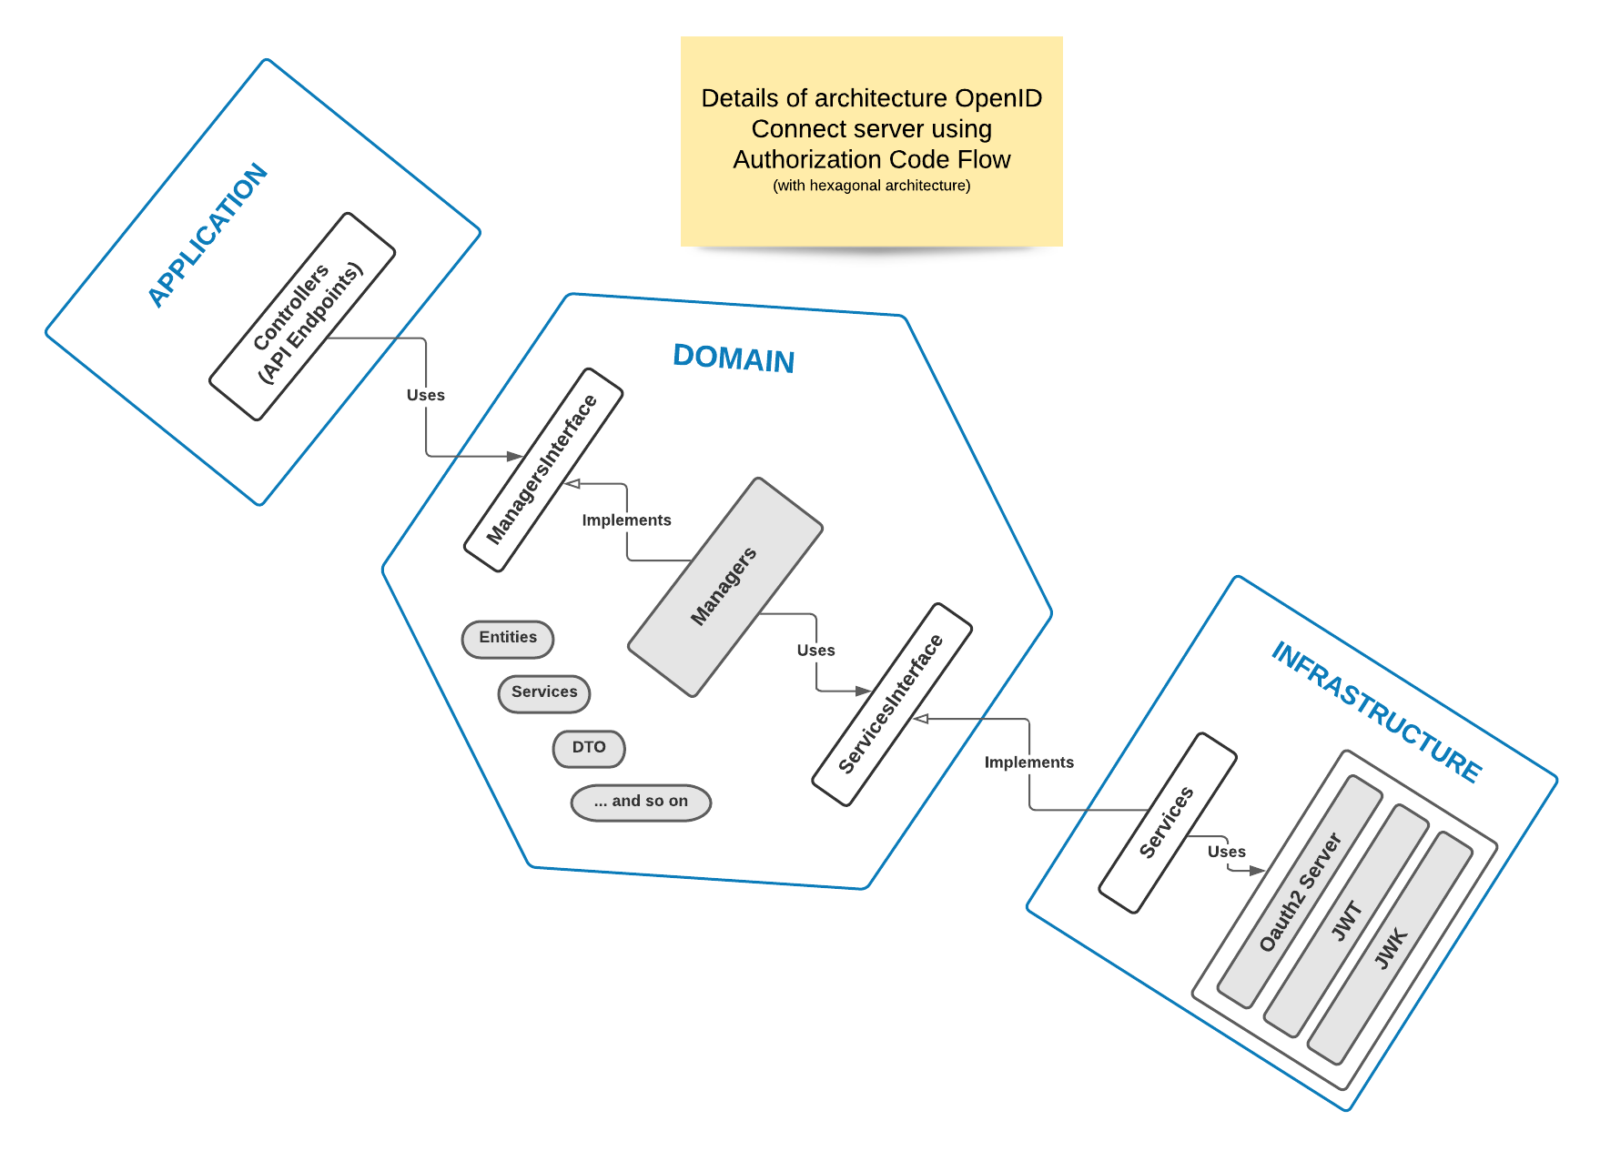 Details of architecture of interactions with OpenID Connect server using Authorization Code Flow (From FOSOAuthServerBundle)